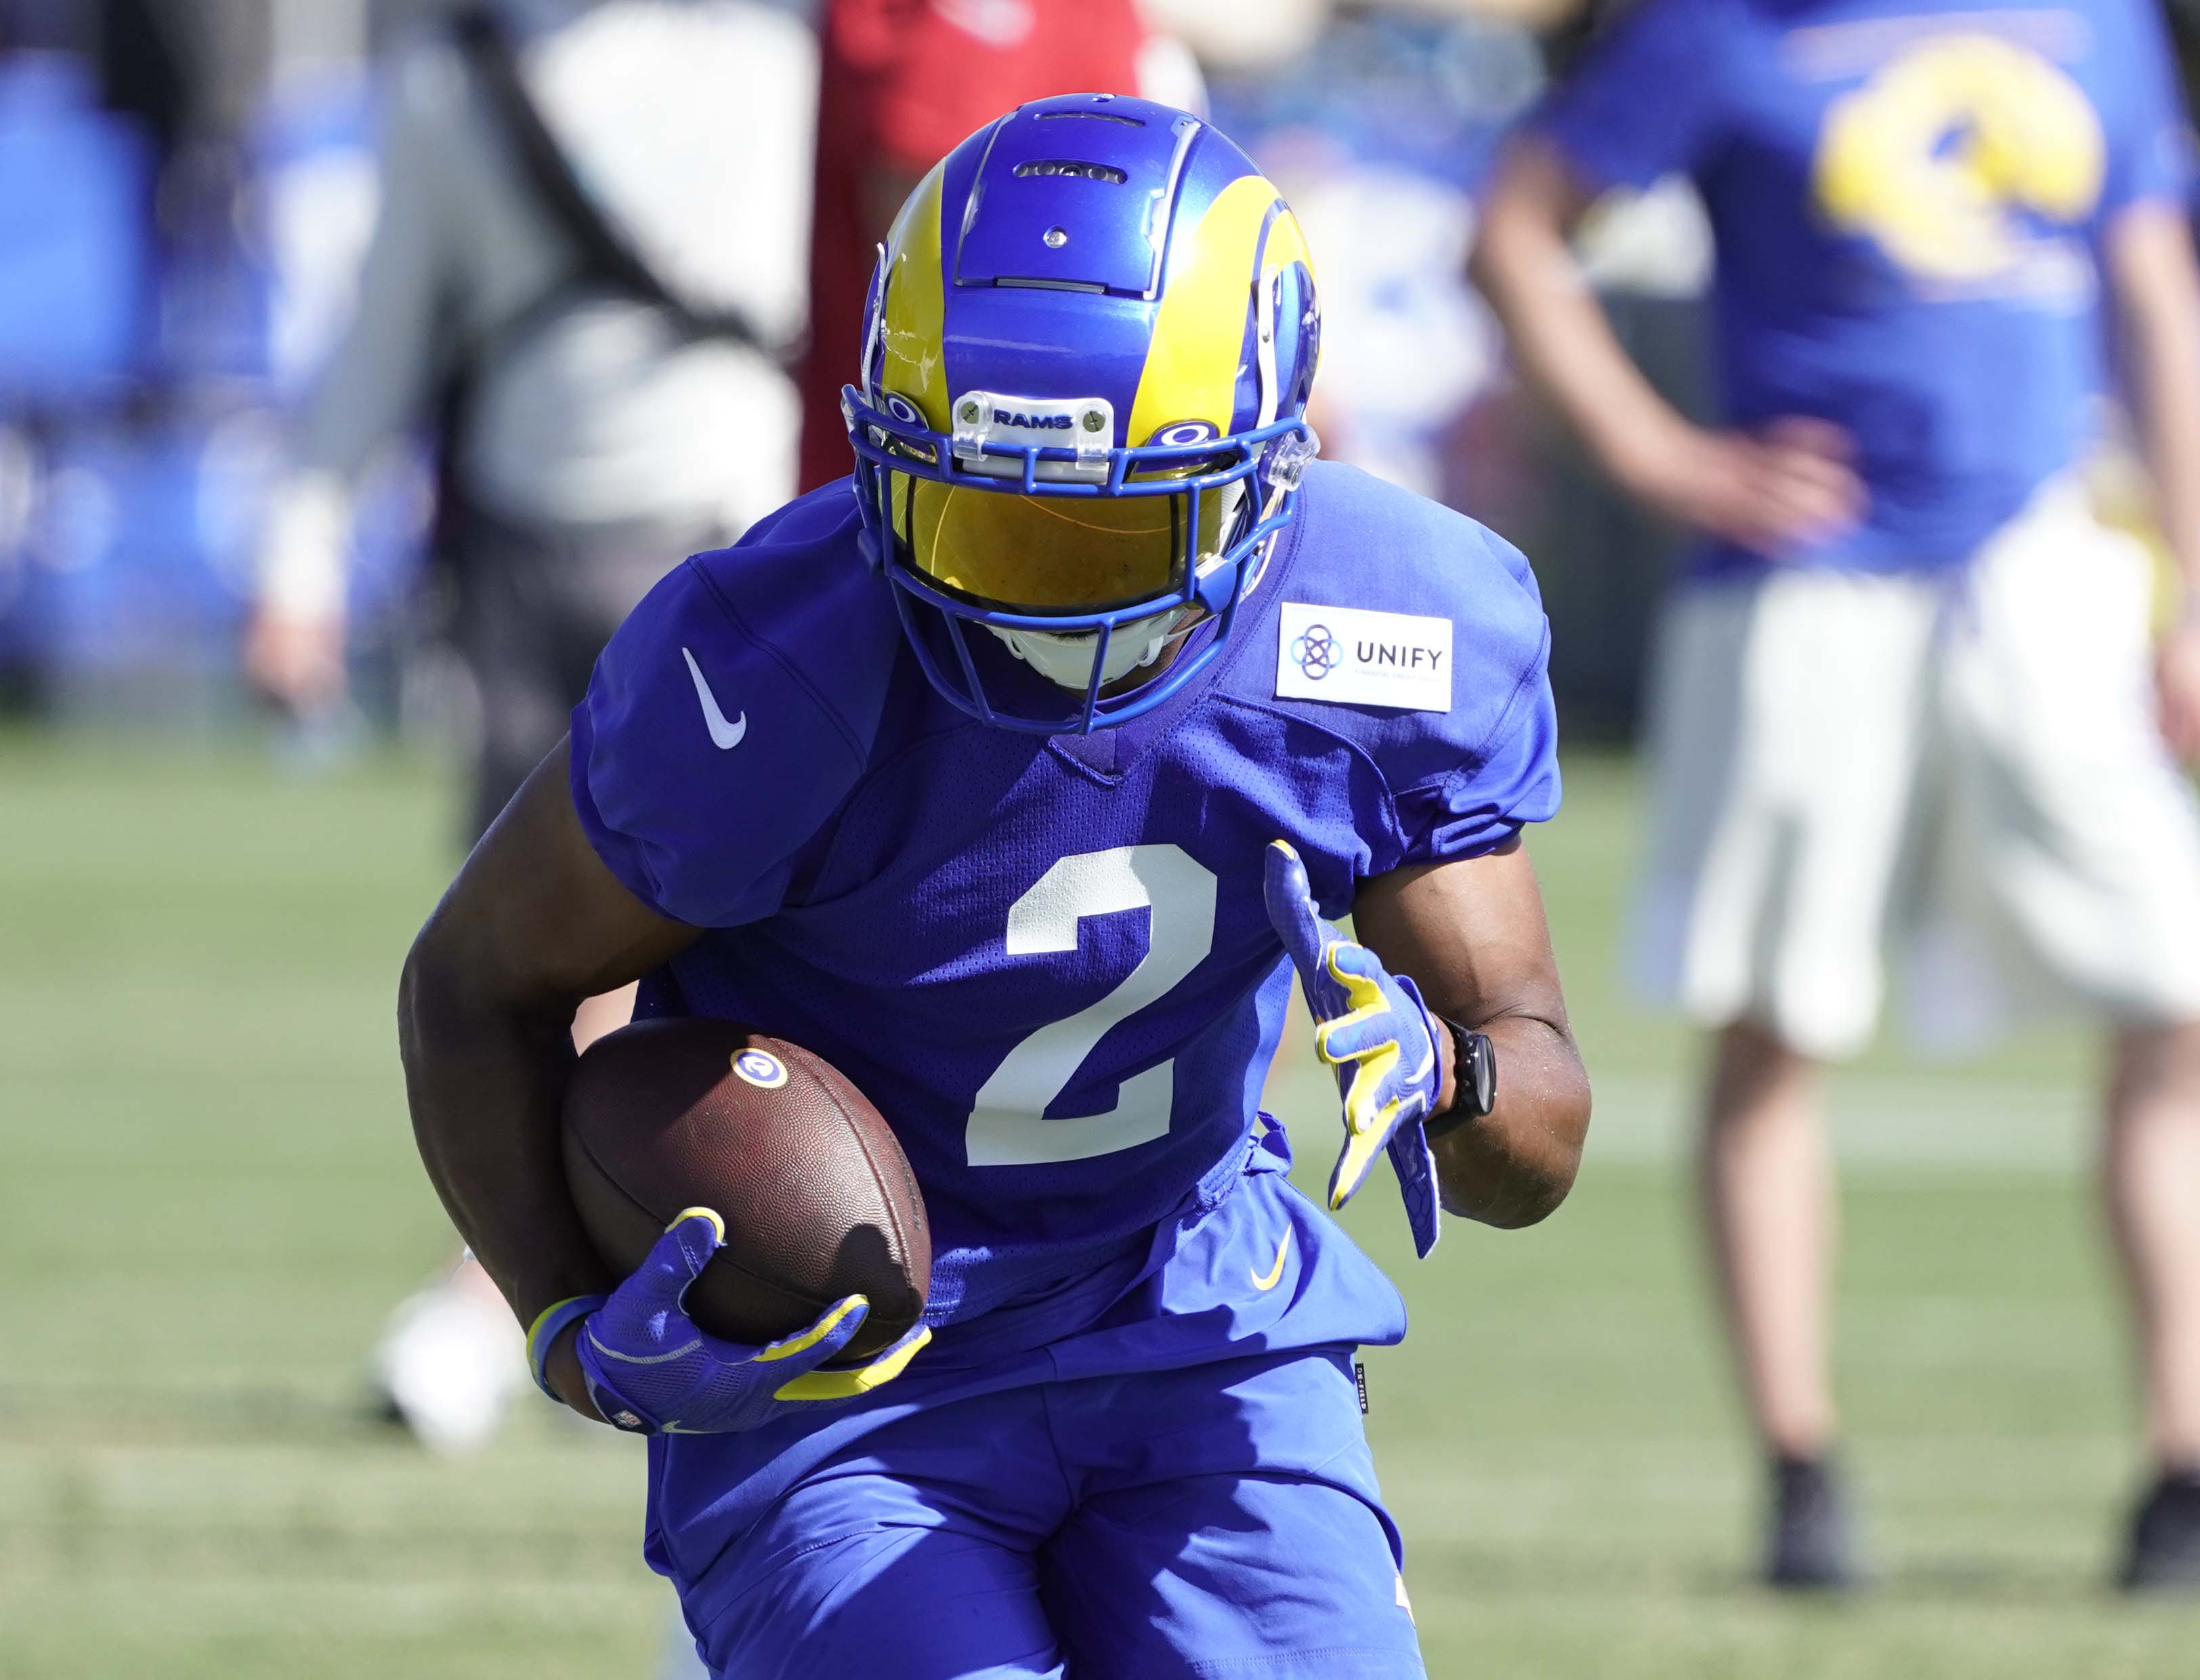 Robert Woods #2 of the Rams working out during the Los Angeles Rams Training Camp on July 31, 2021, at UC Irvine in Irvine, CA.